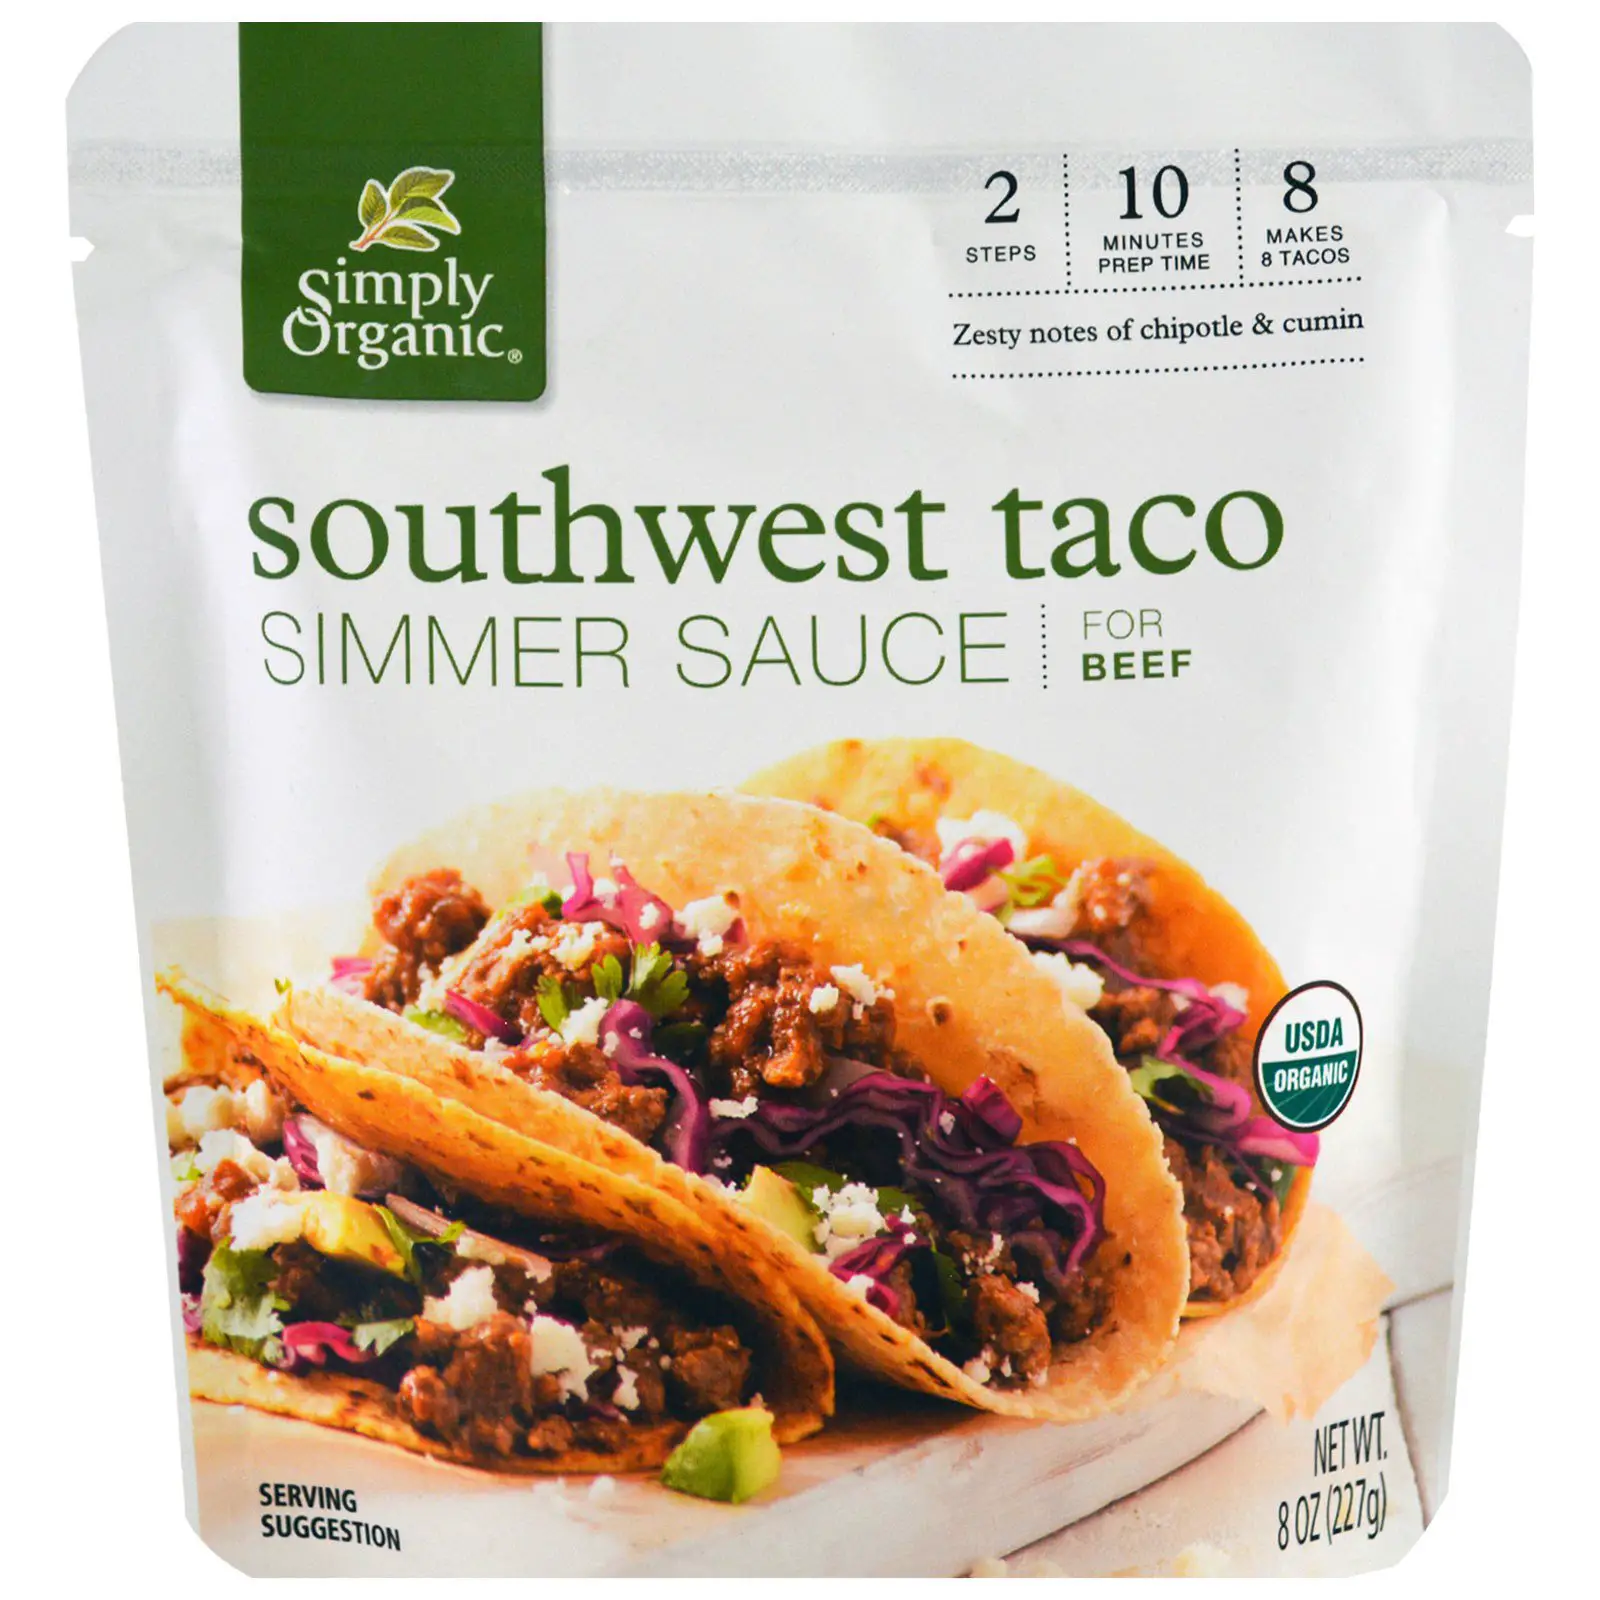 Simply Organic, Organic Simmer Sauce, Southwest Taco, For Beef, 8 oz ...